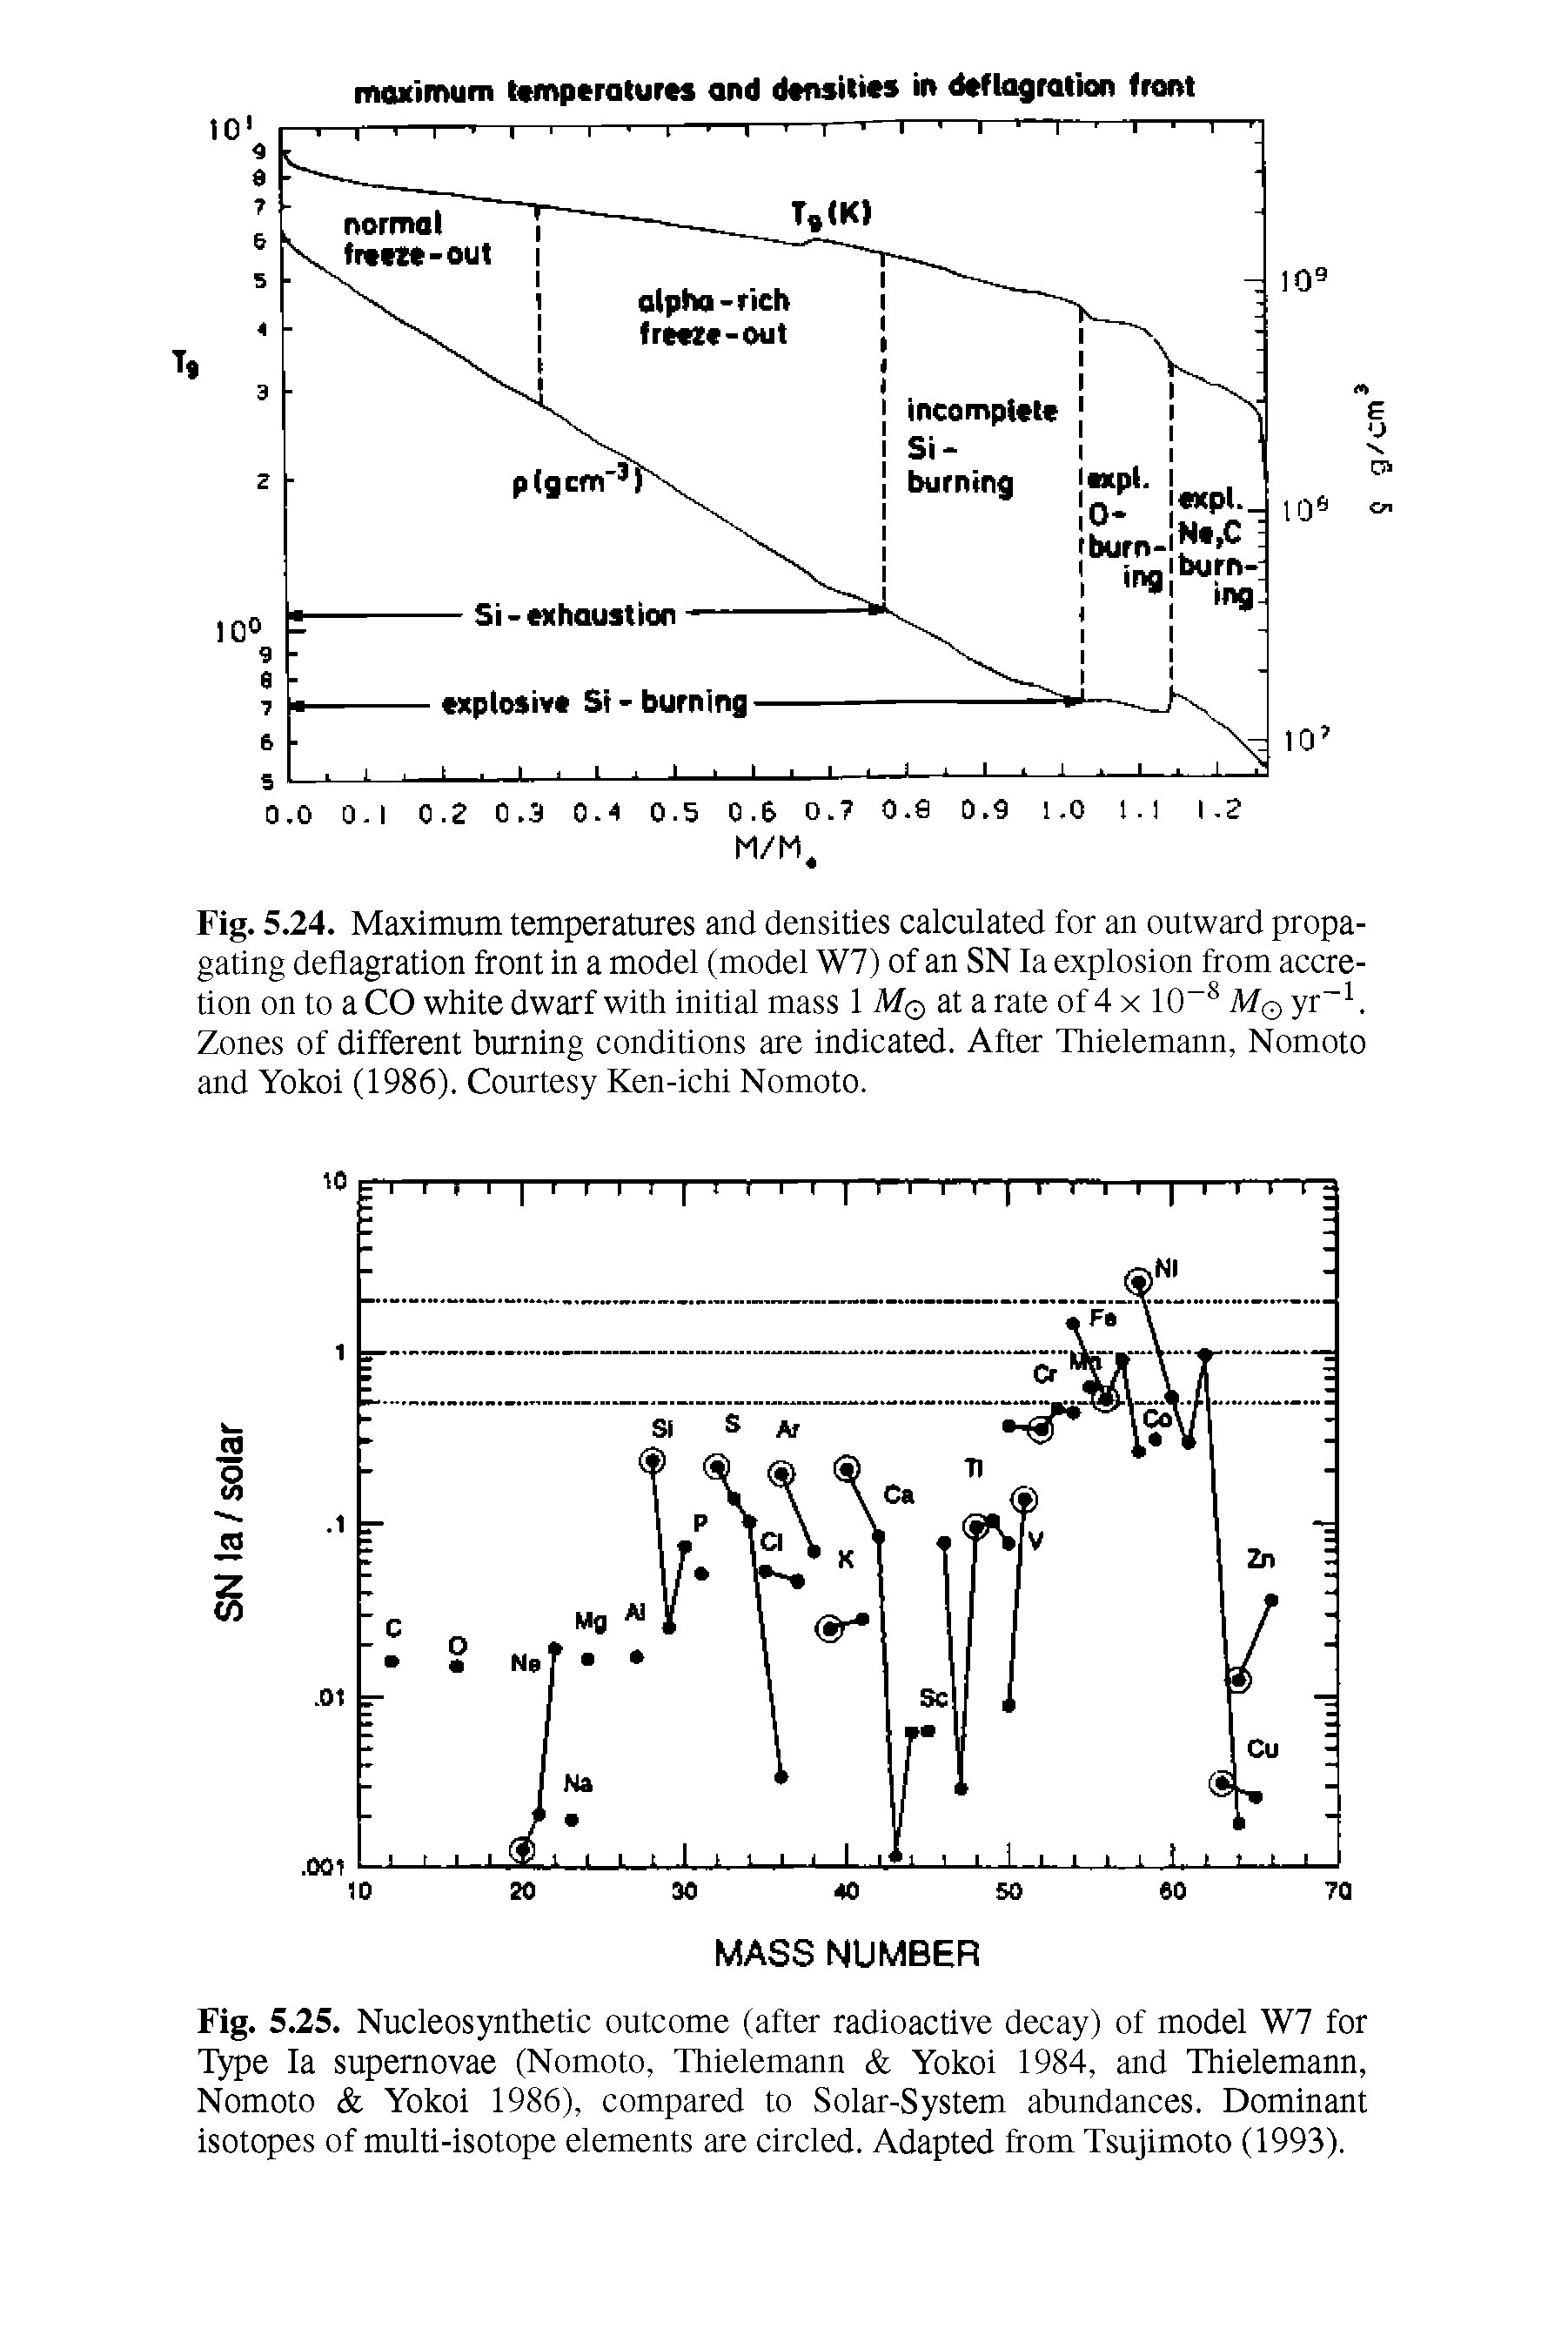 Fig. 5.25. Nucleosynthetic outcome (after radioactive decay) of model W7 for Type la supernovae (Nomoto, Thielemann Yokoi 1984, and Thielemann, Nomoto Yokoi 1986), compared to Solar-System abundances. Dominant isotopes of multi-isotope elements are circled. Adapted from Tsujimoto (1993).